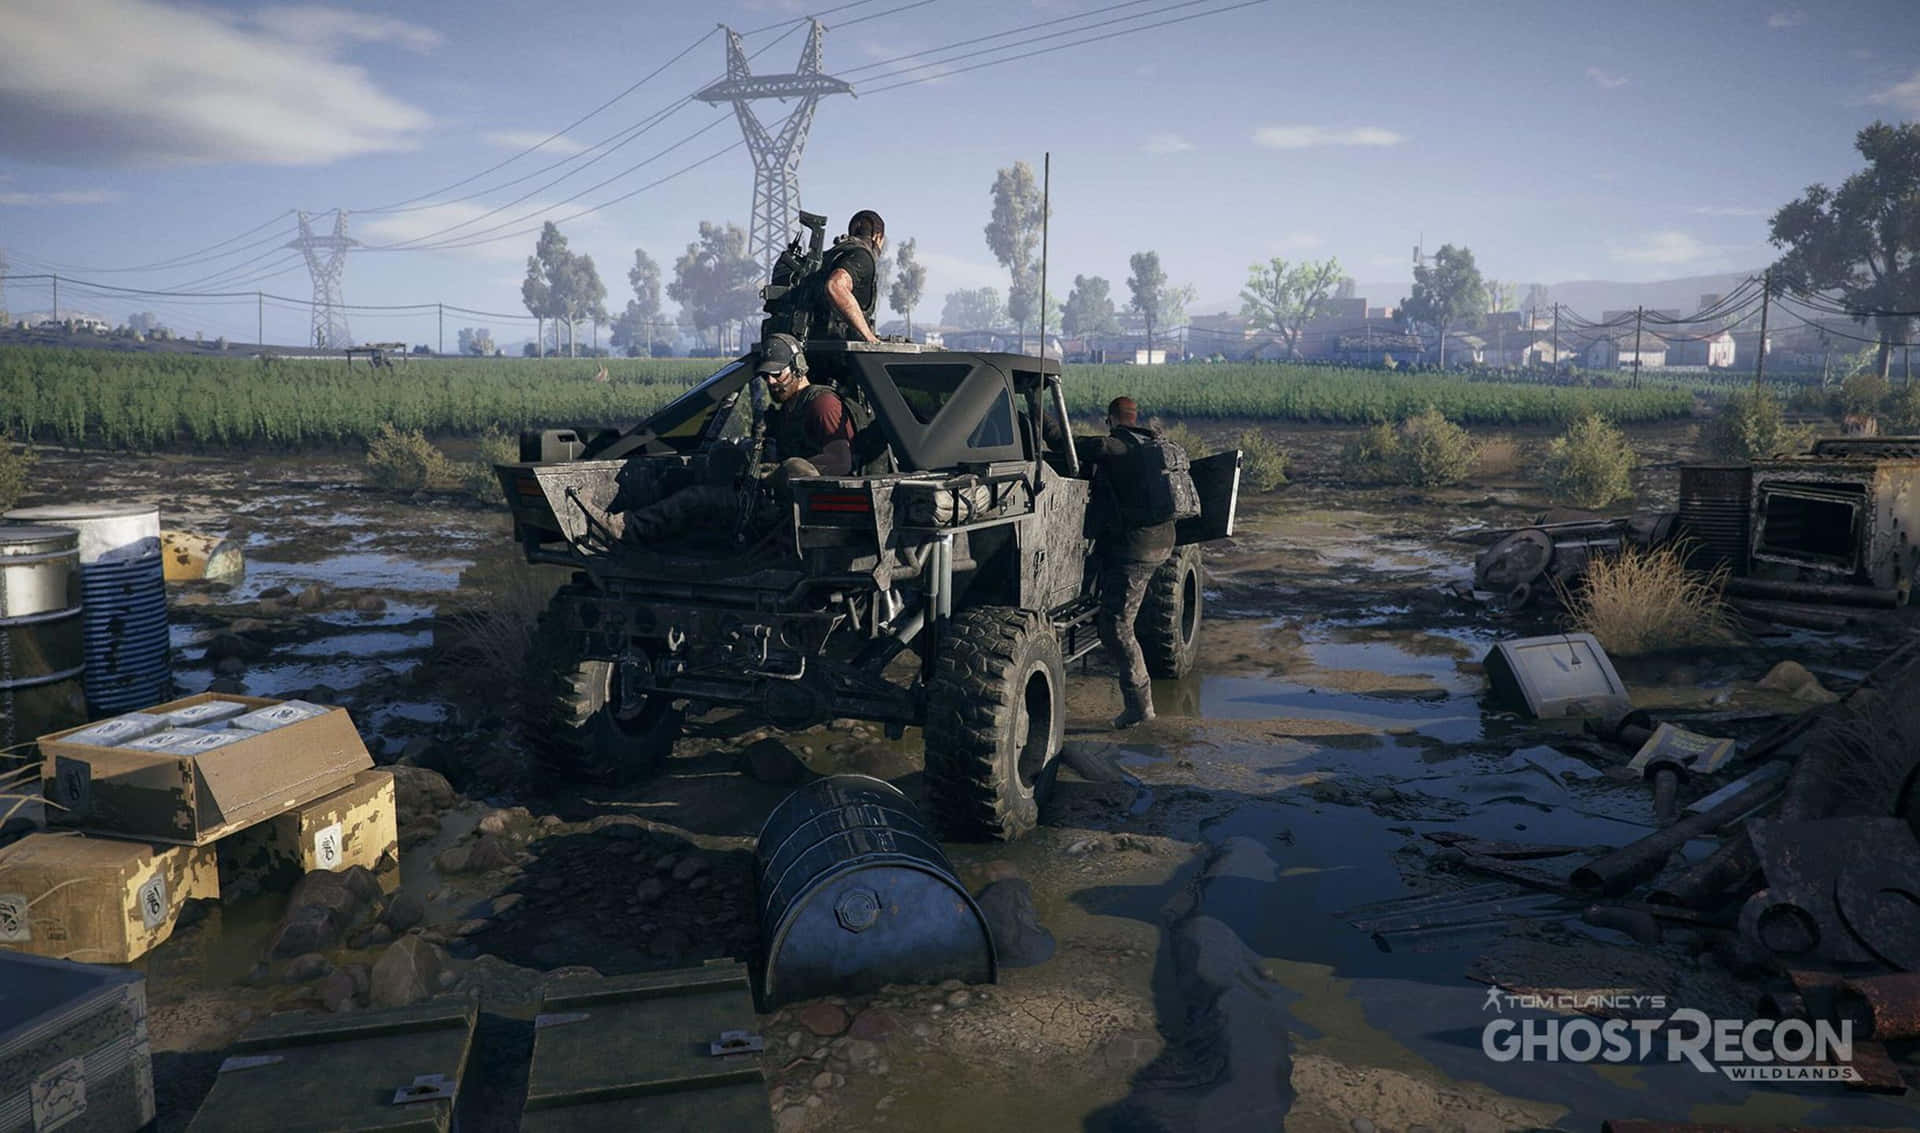 2440x1440 Ghost Recon Wildlands Squad In A Swamp Background